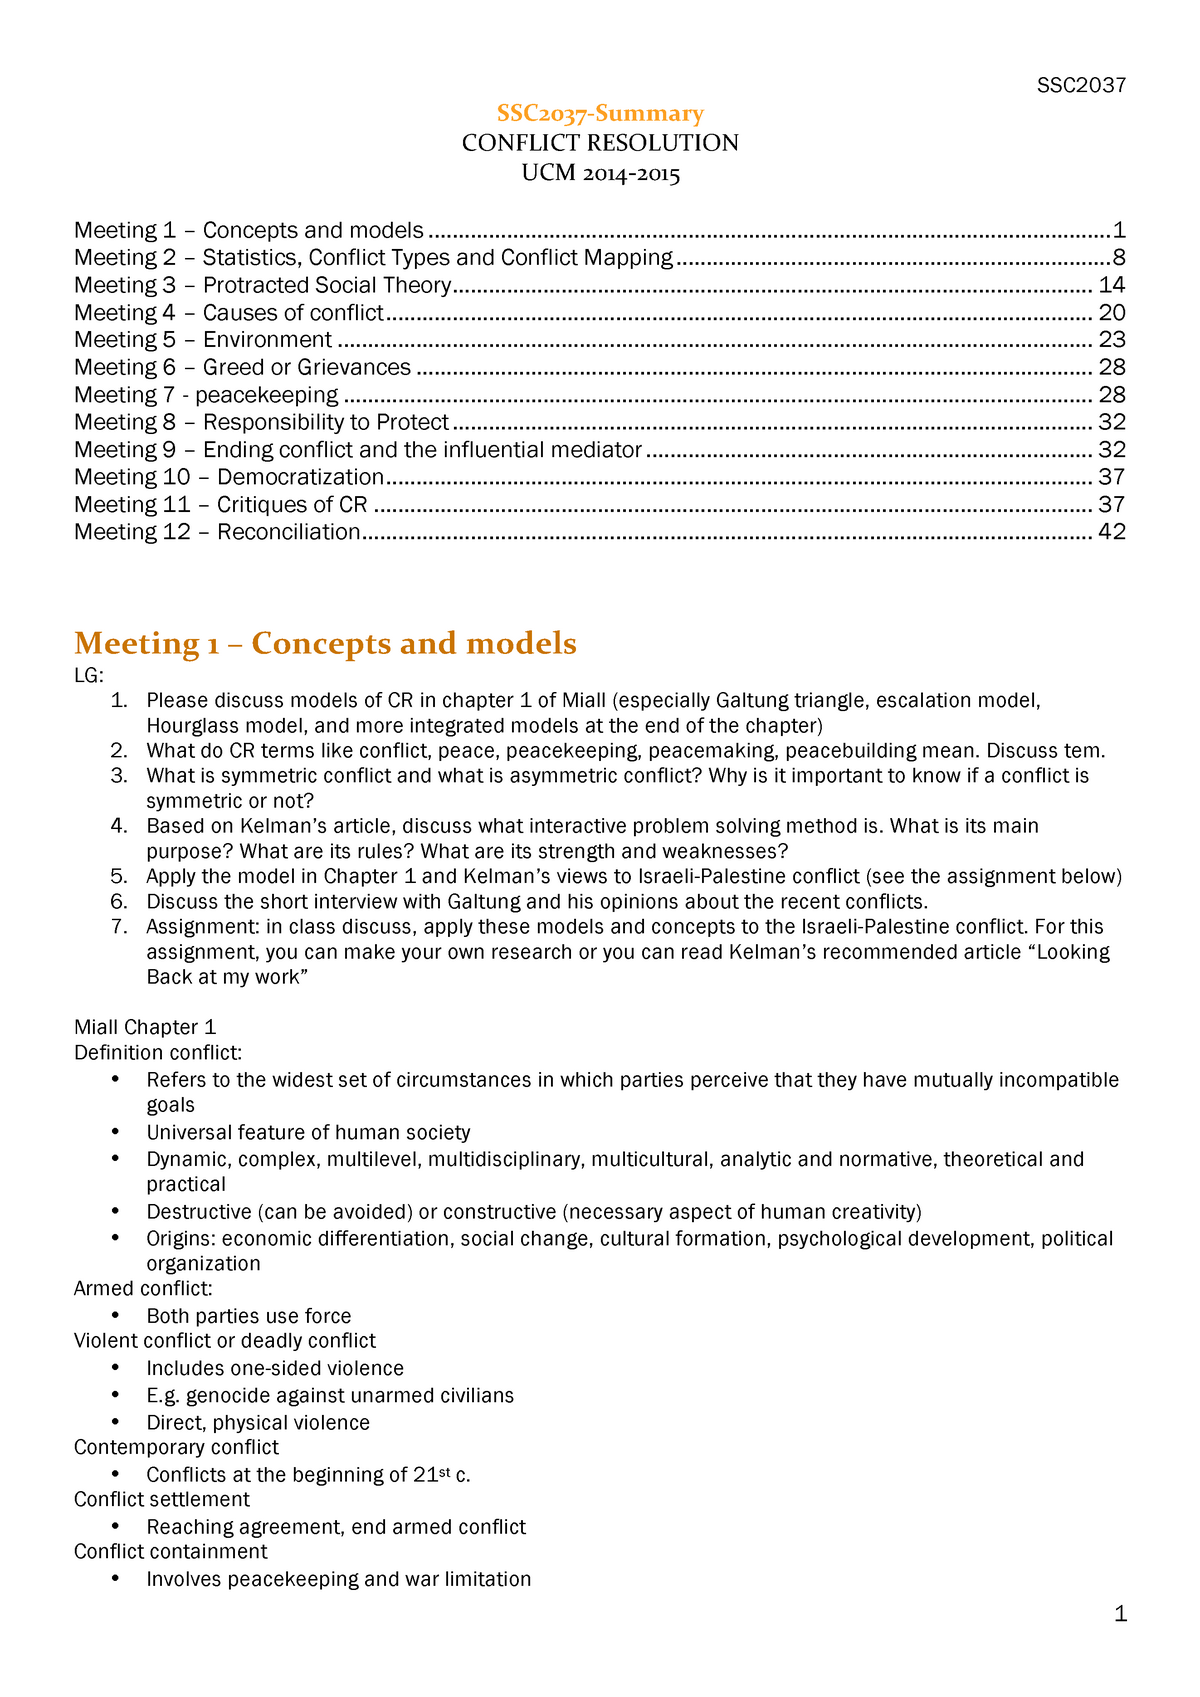 conflict-resolution-summary-ssc2037-conflict-resolution-ucm-meeting-1